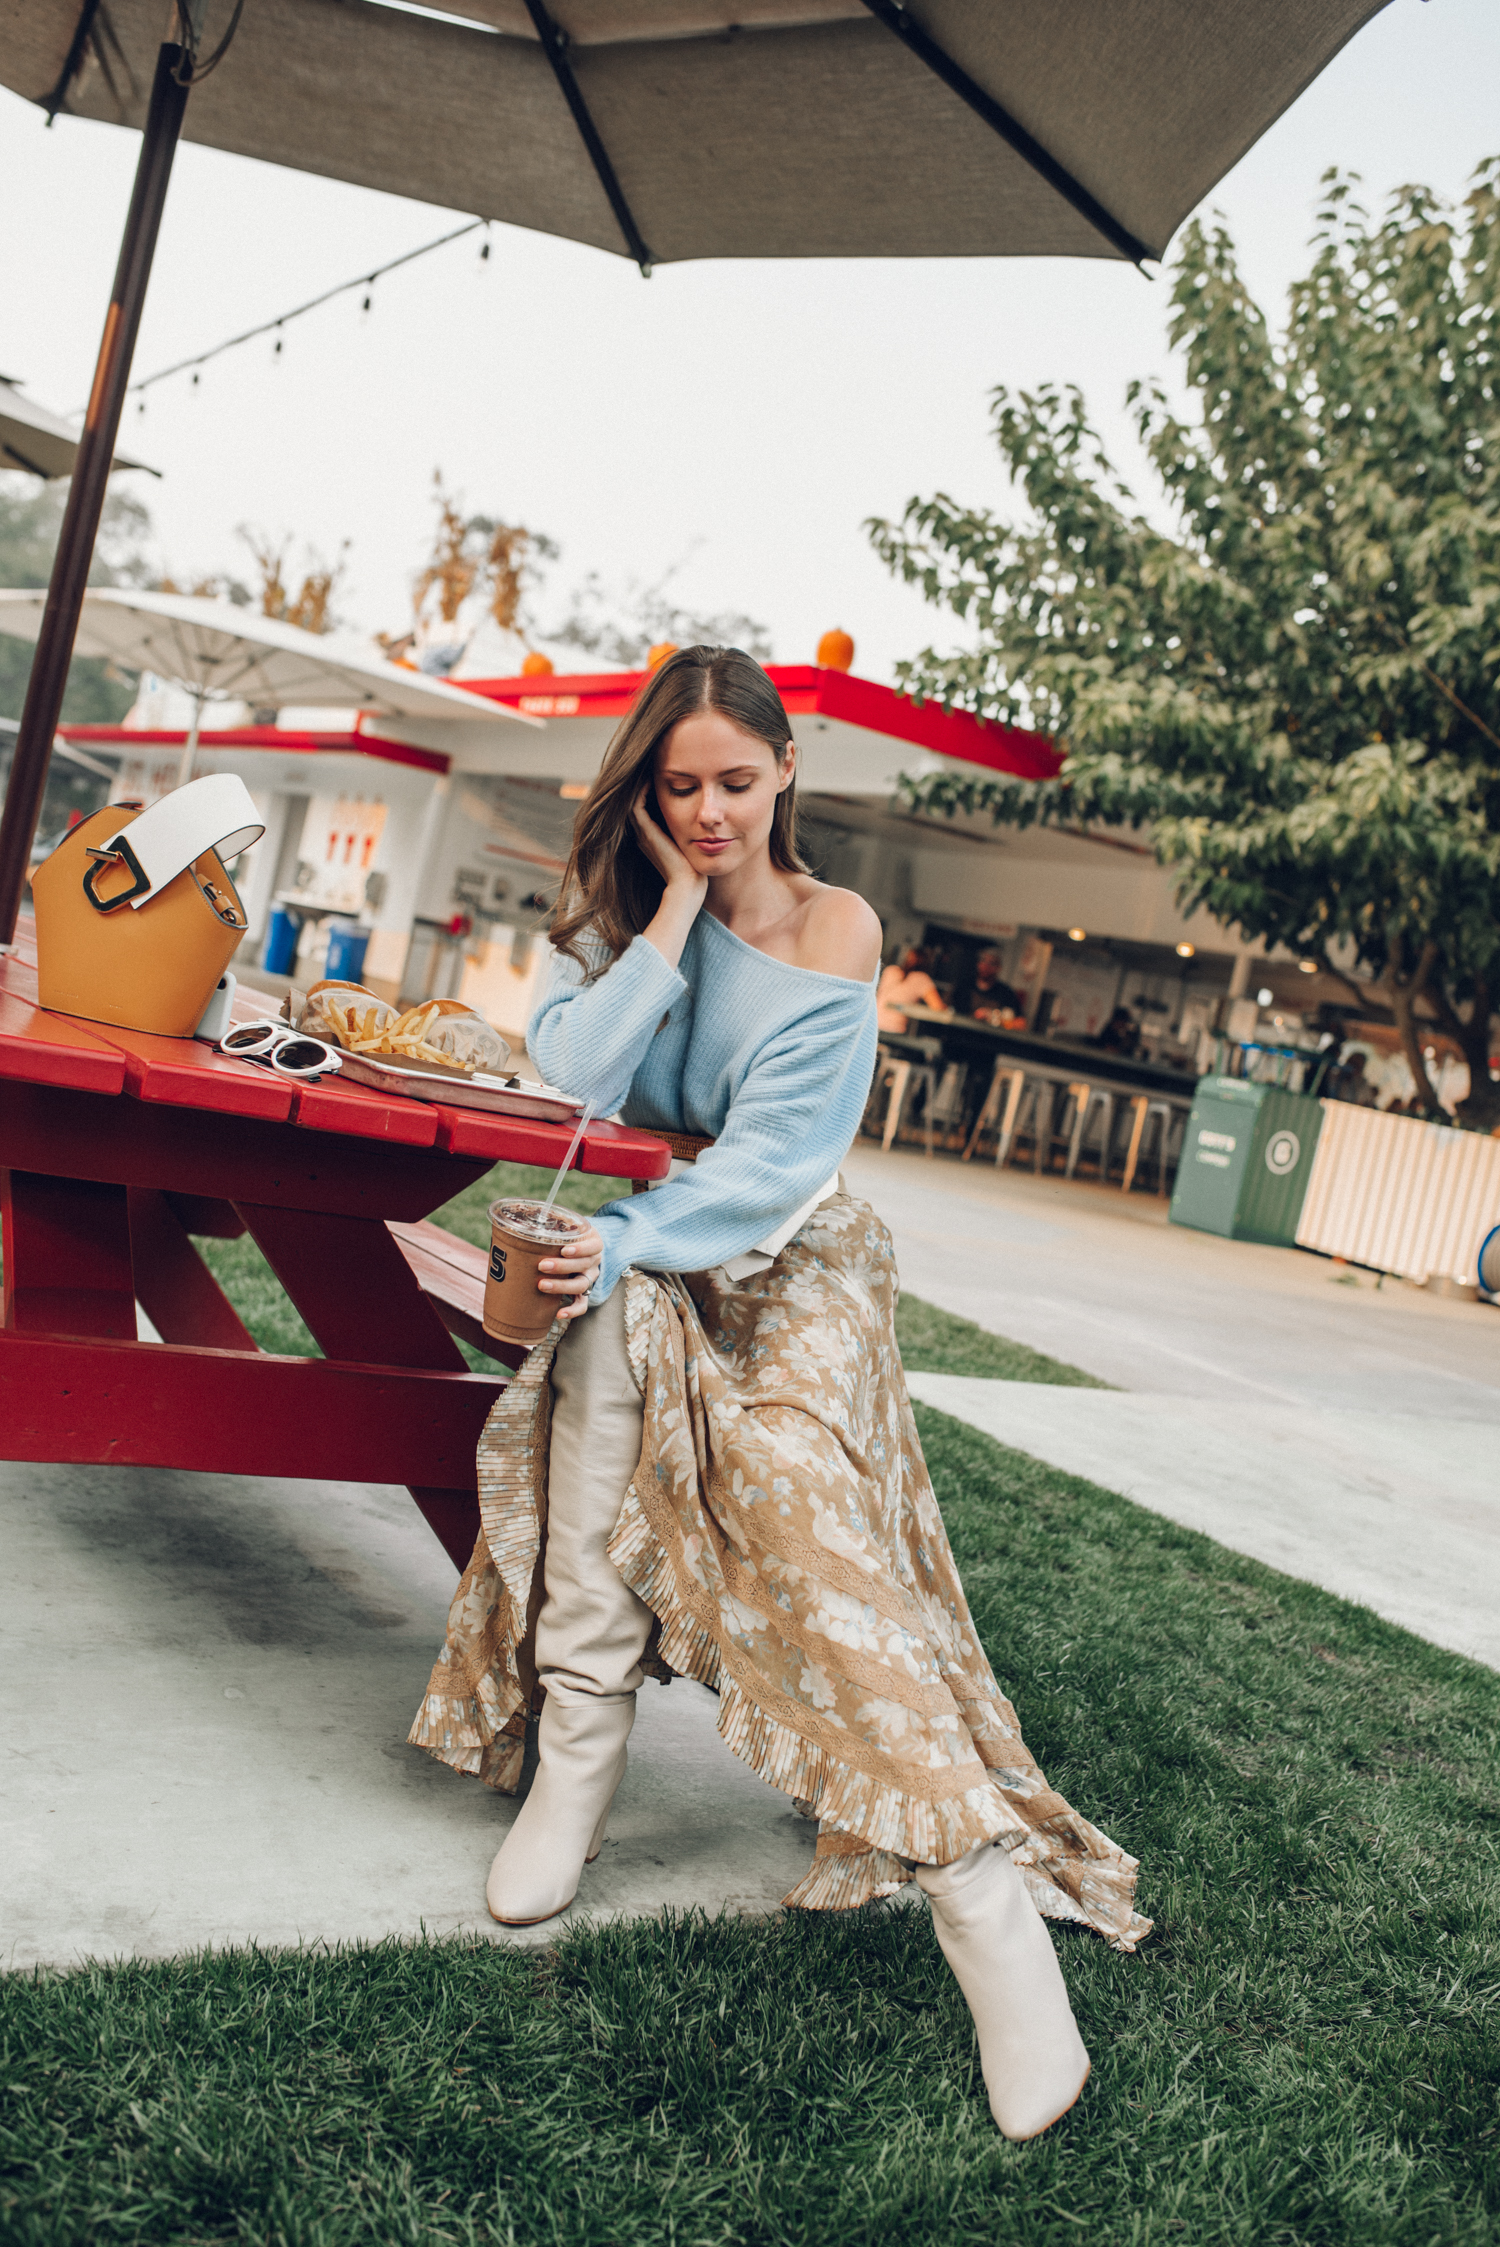 Alyssa Campanella of The A List blog visits Gott's Roadside in St. Helena for Cabernet season 2018 wearing Zimmermann hanky skirt, What For ivory boots, 360Cashmere Oneta sweater, and Danse Lente bucket bag